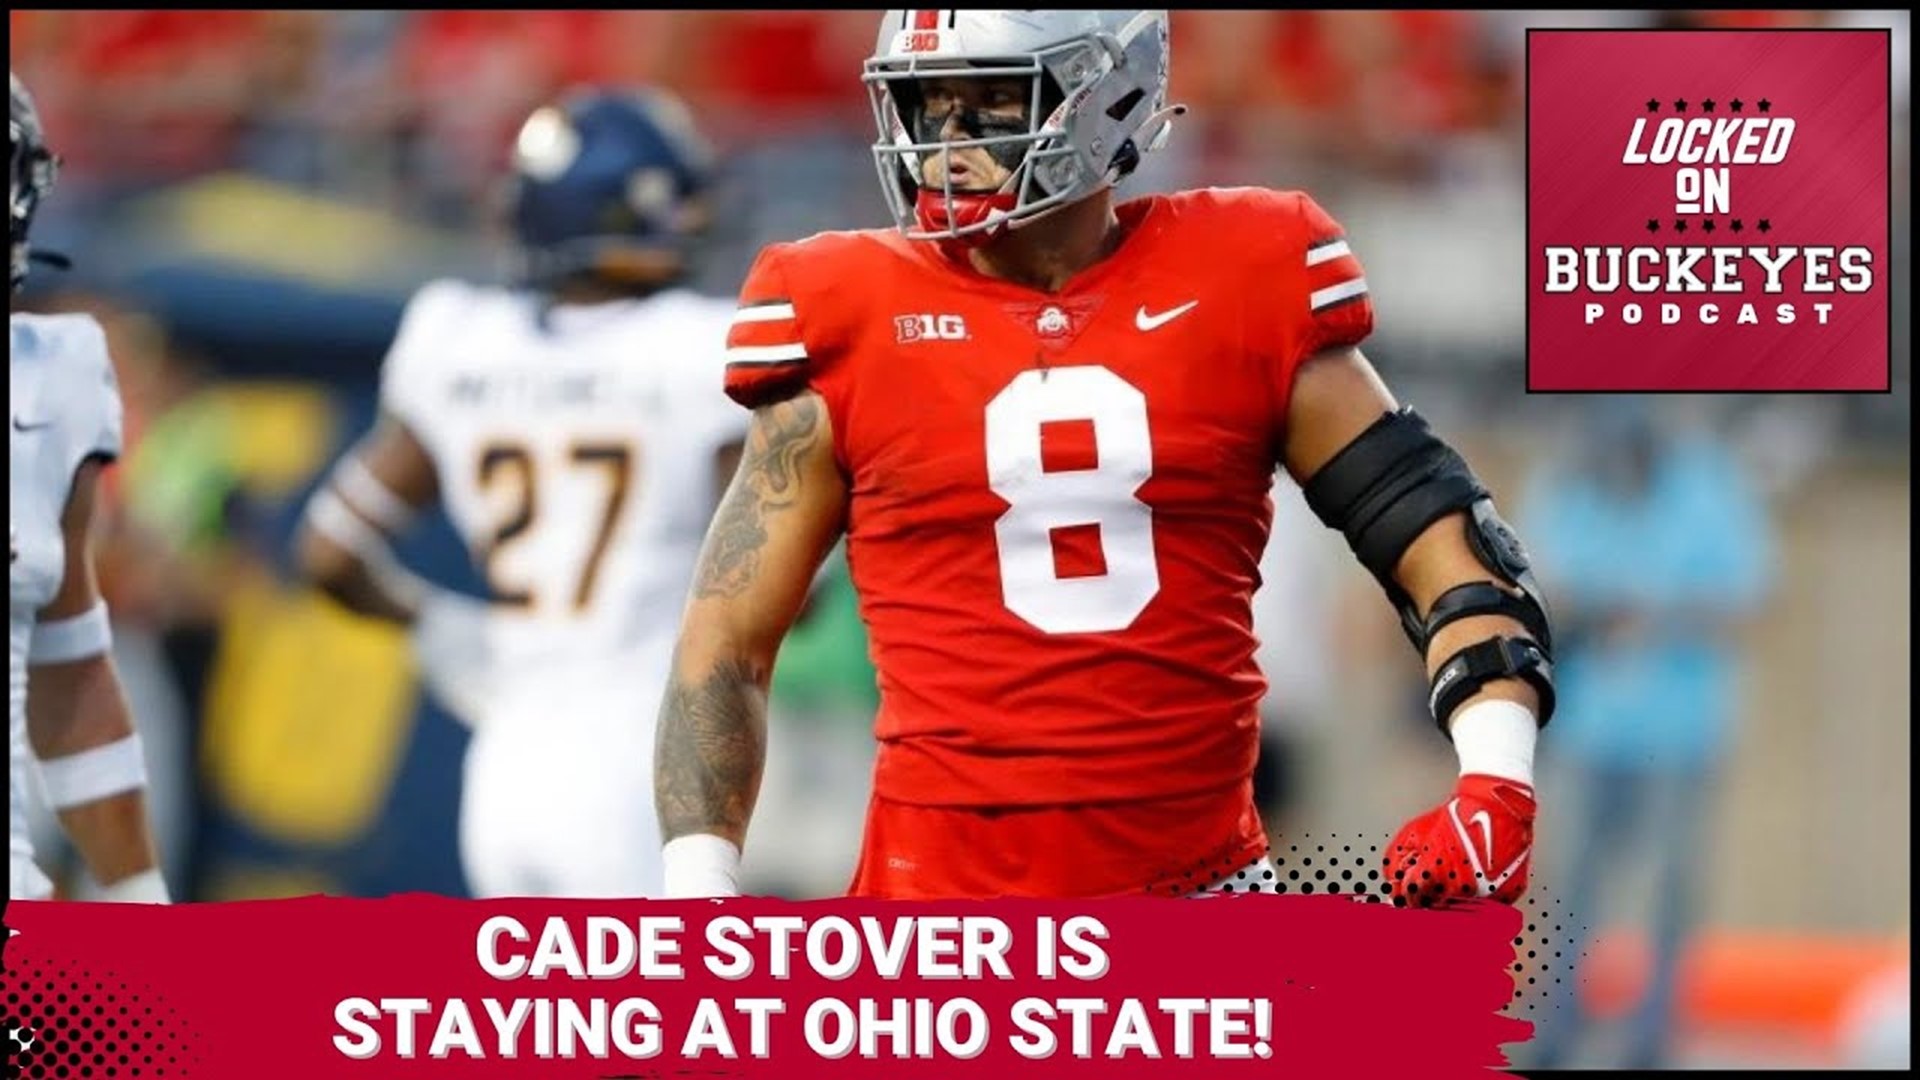 Cade Stover and Xavier Johnson announced that they will be staying at Ohio State to play another year with the Buckeyes.